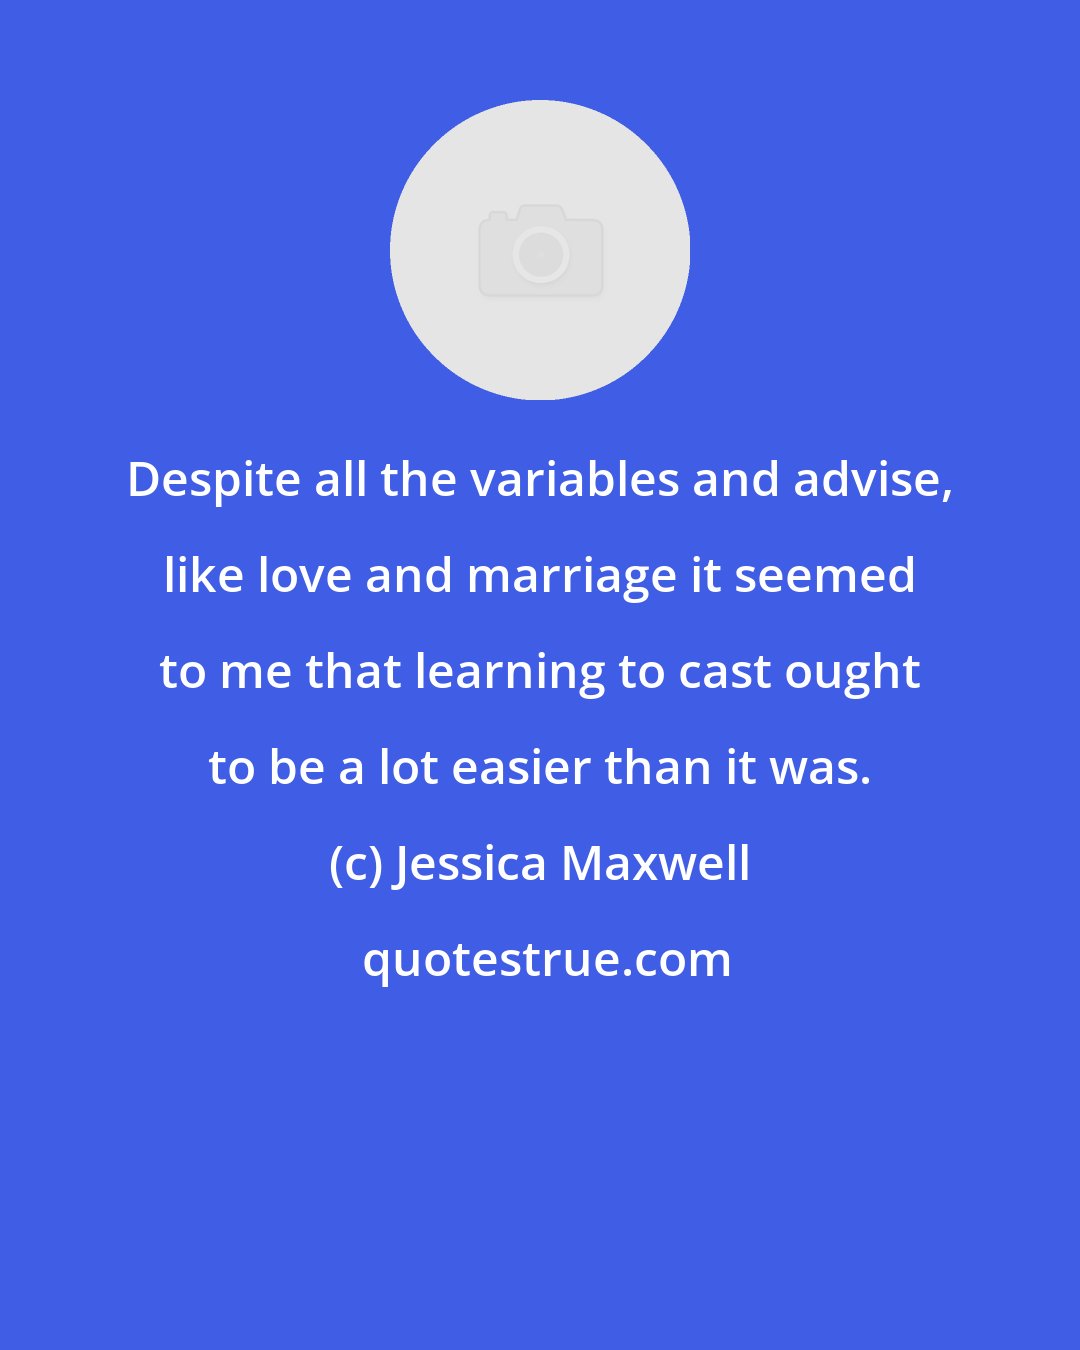 Jessica Maxwell: Despite all the variables and advise, like love and marriage it seemed to me that learning to cast ought to be a lot easier than it was.